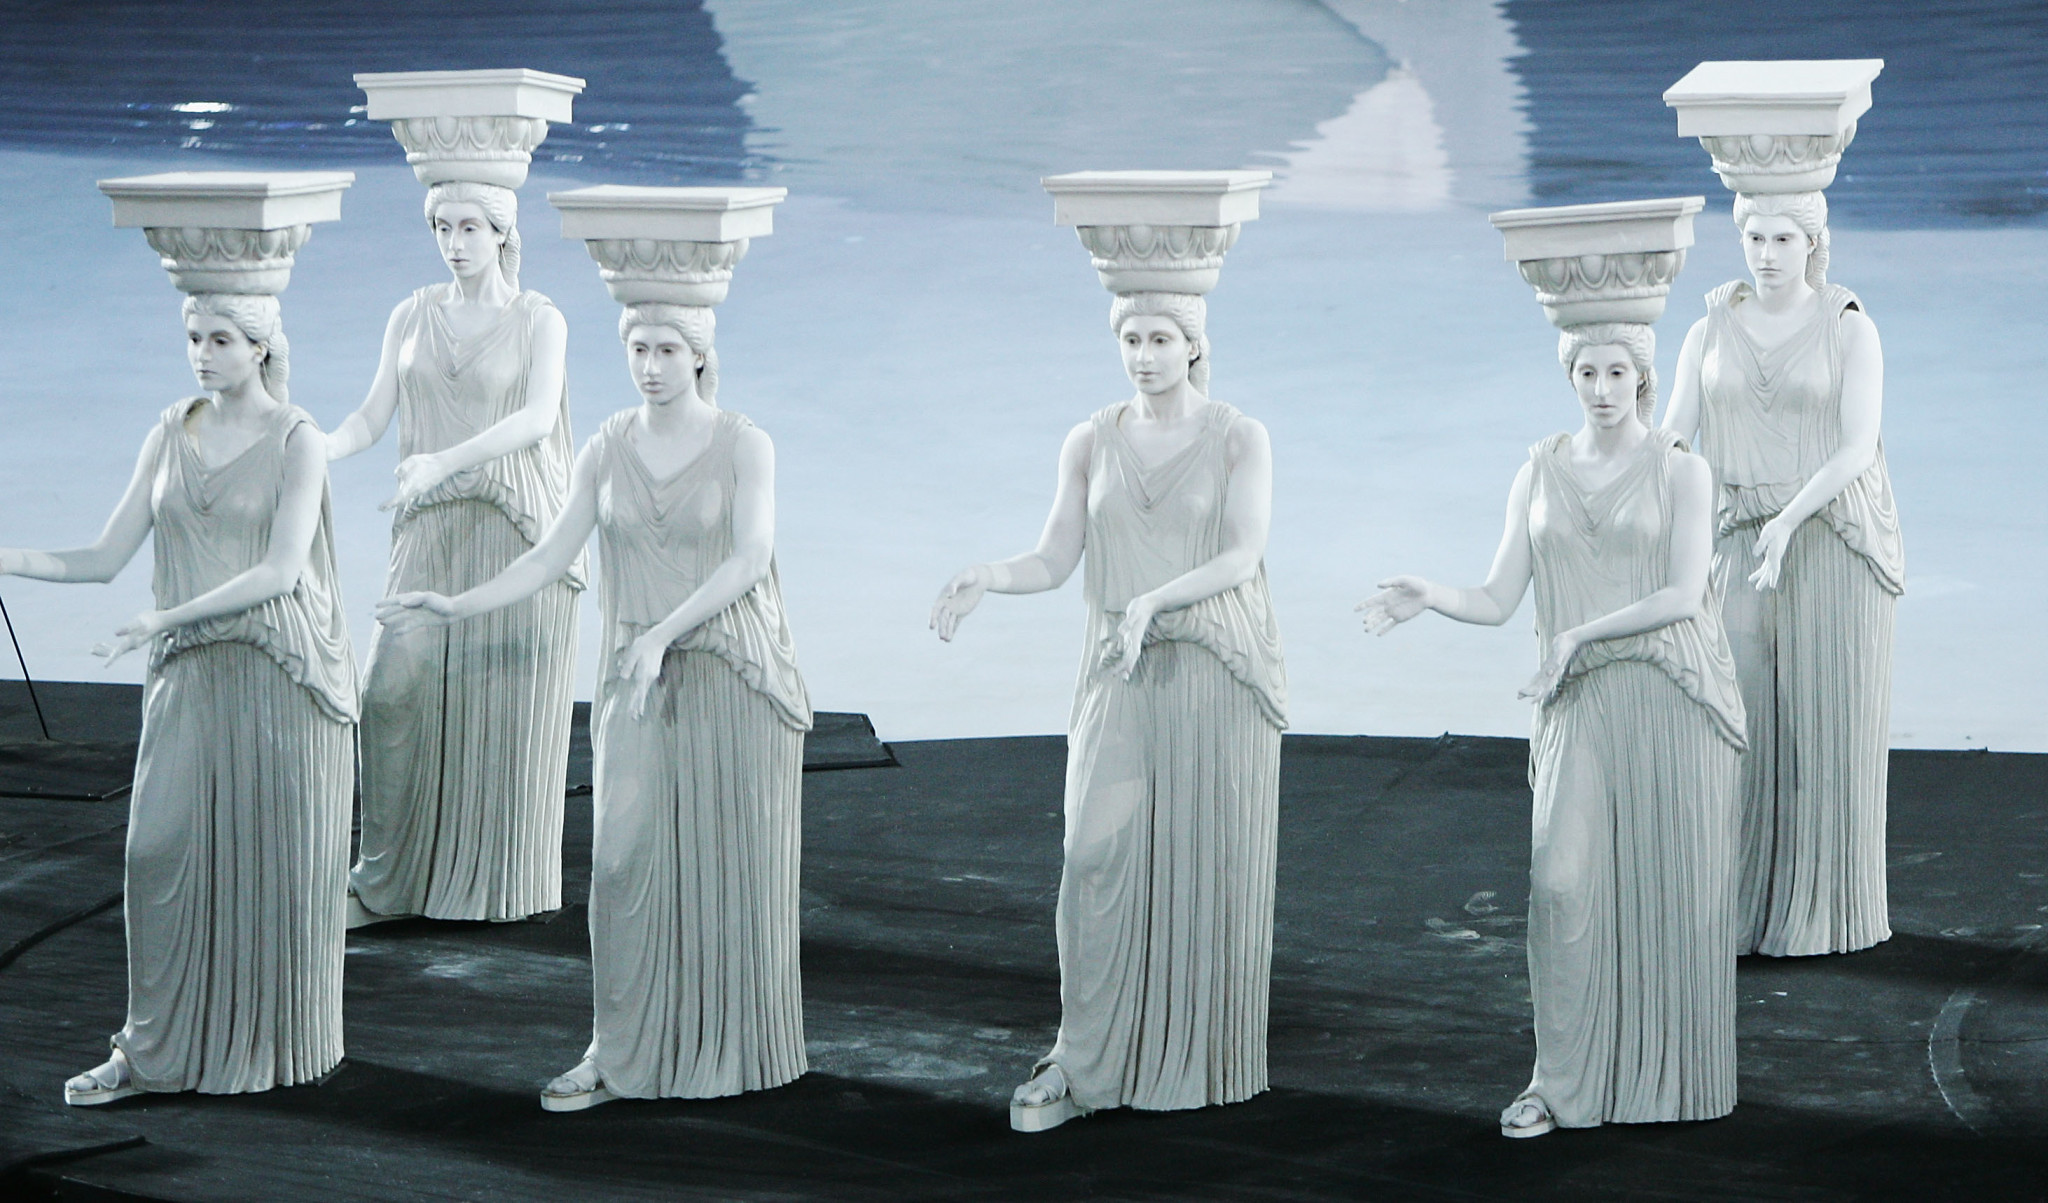 Artistic images from the Games of antiquity inspired the 2004 Opening Ceremony in Athens ©Getty Images